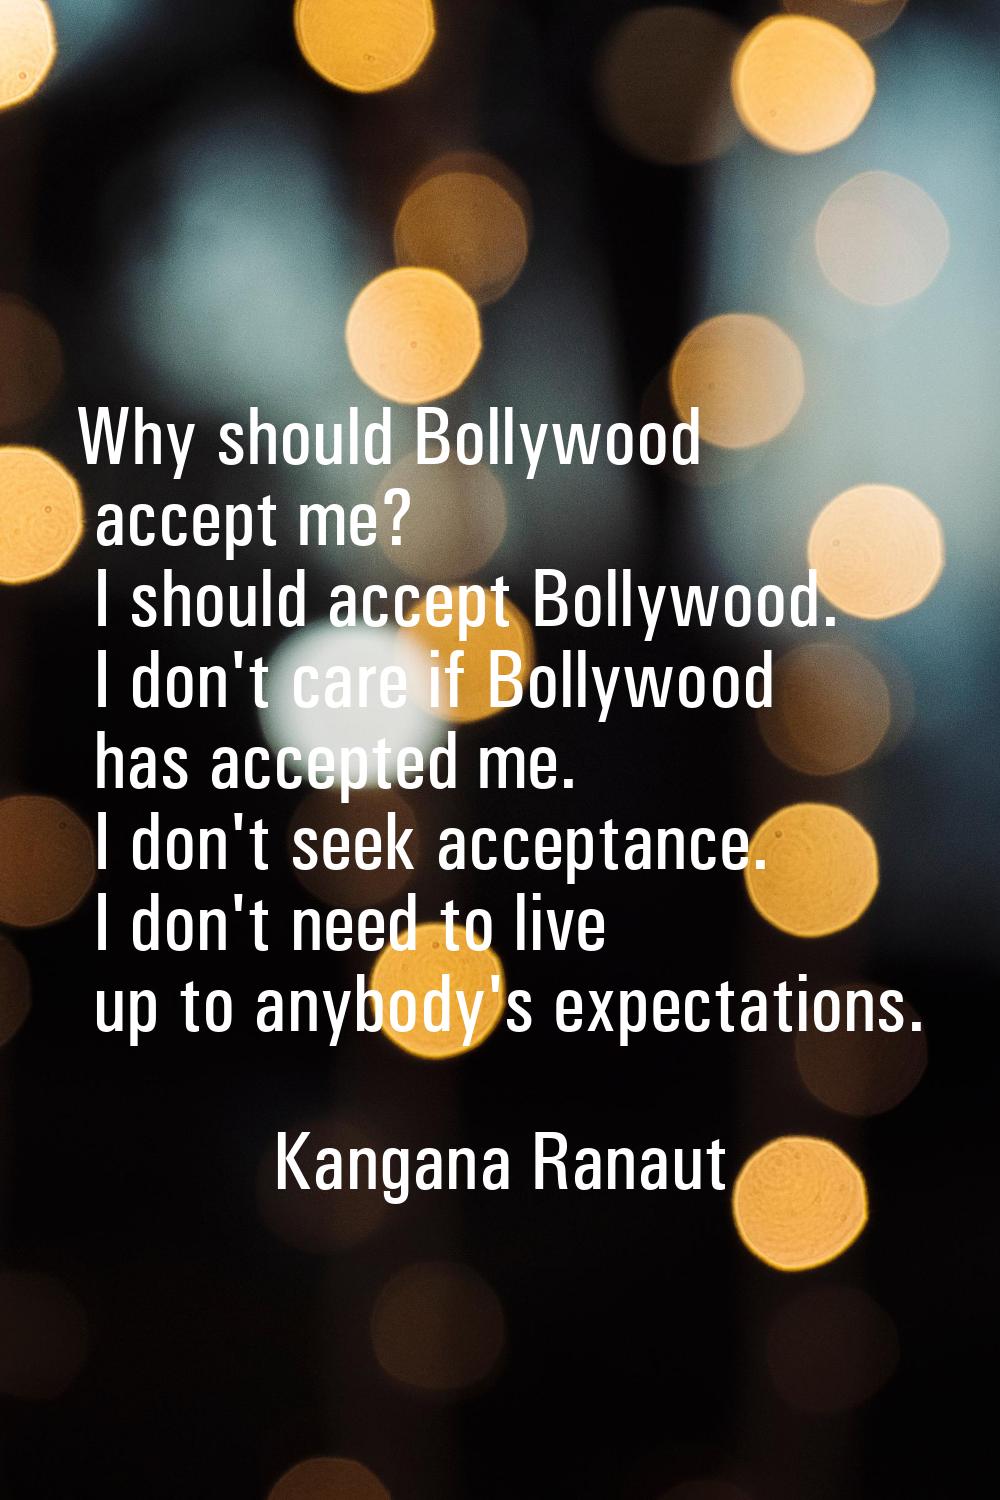 Why should Bollywood accept me? I should accept Bollywood. I don't care if Bollywood has accepted m